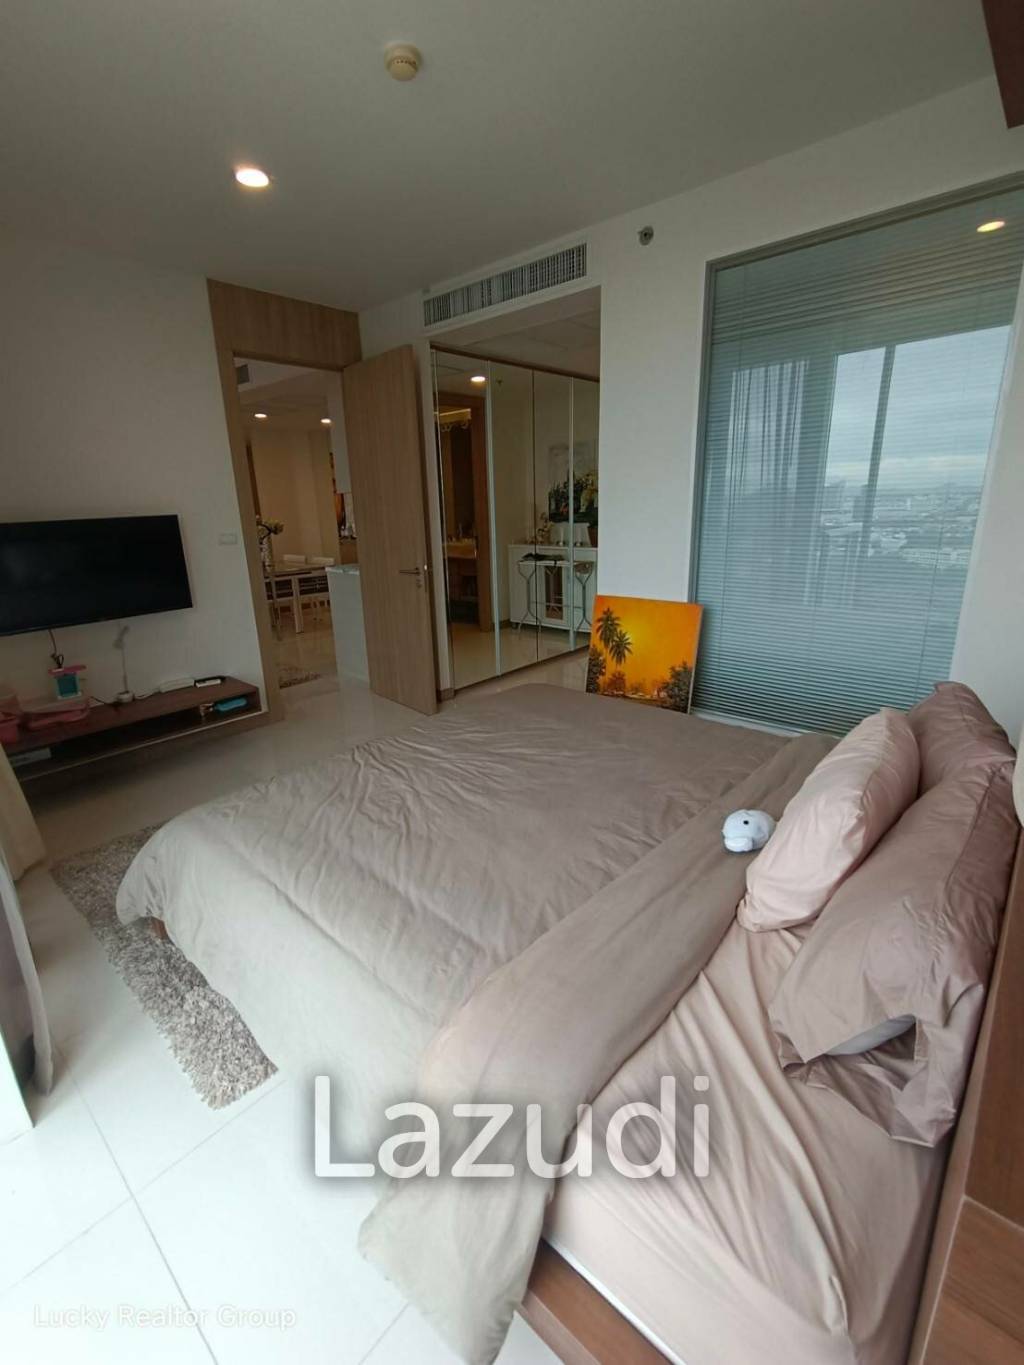 Riviera Wongamat Condo for Sale